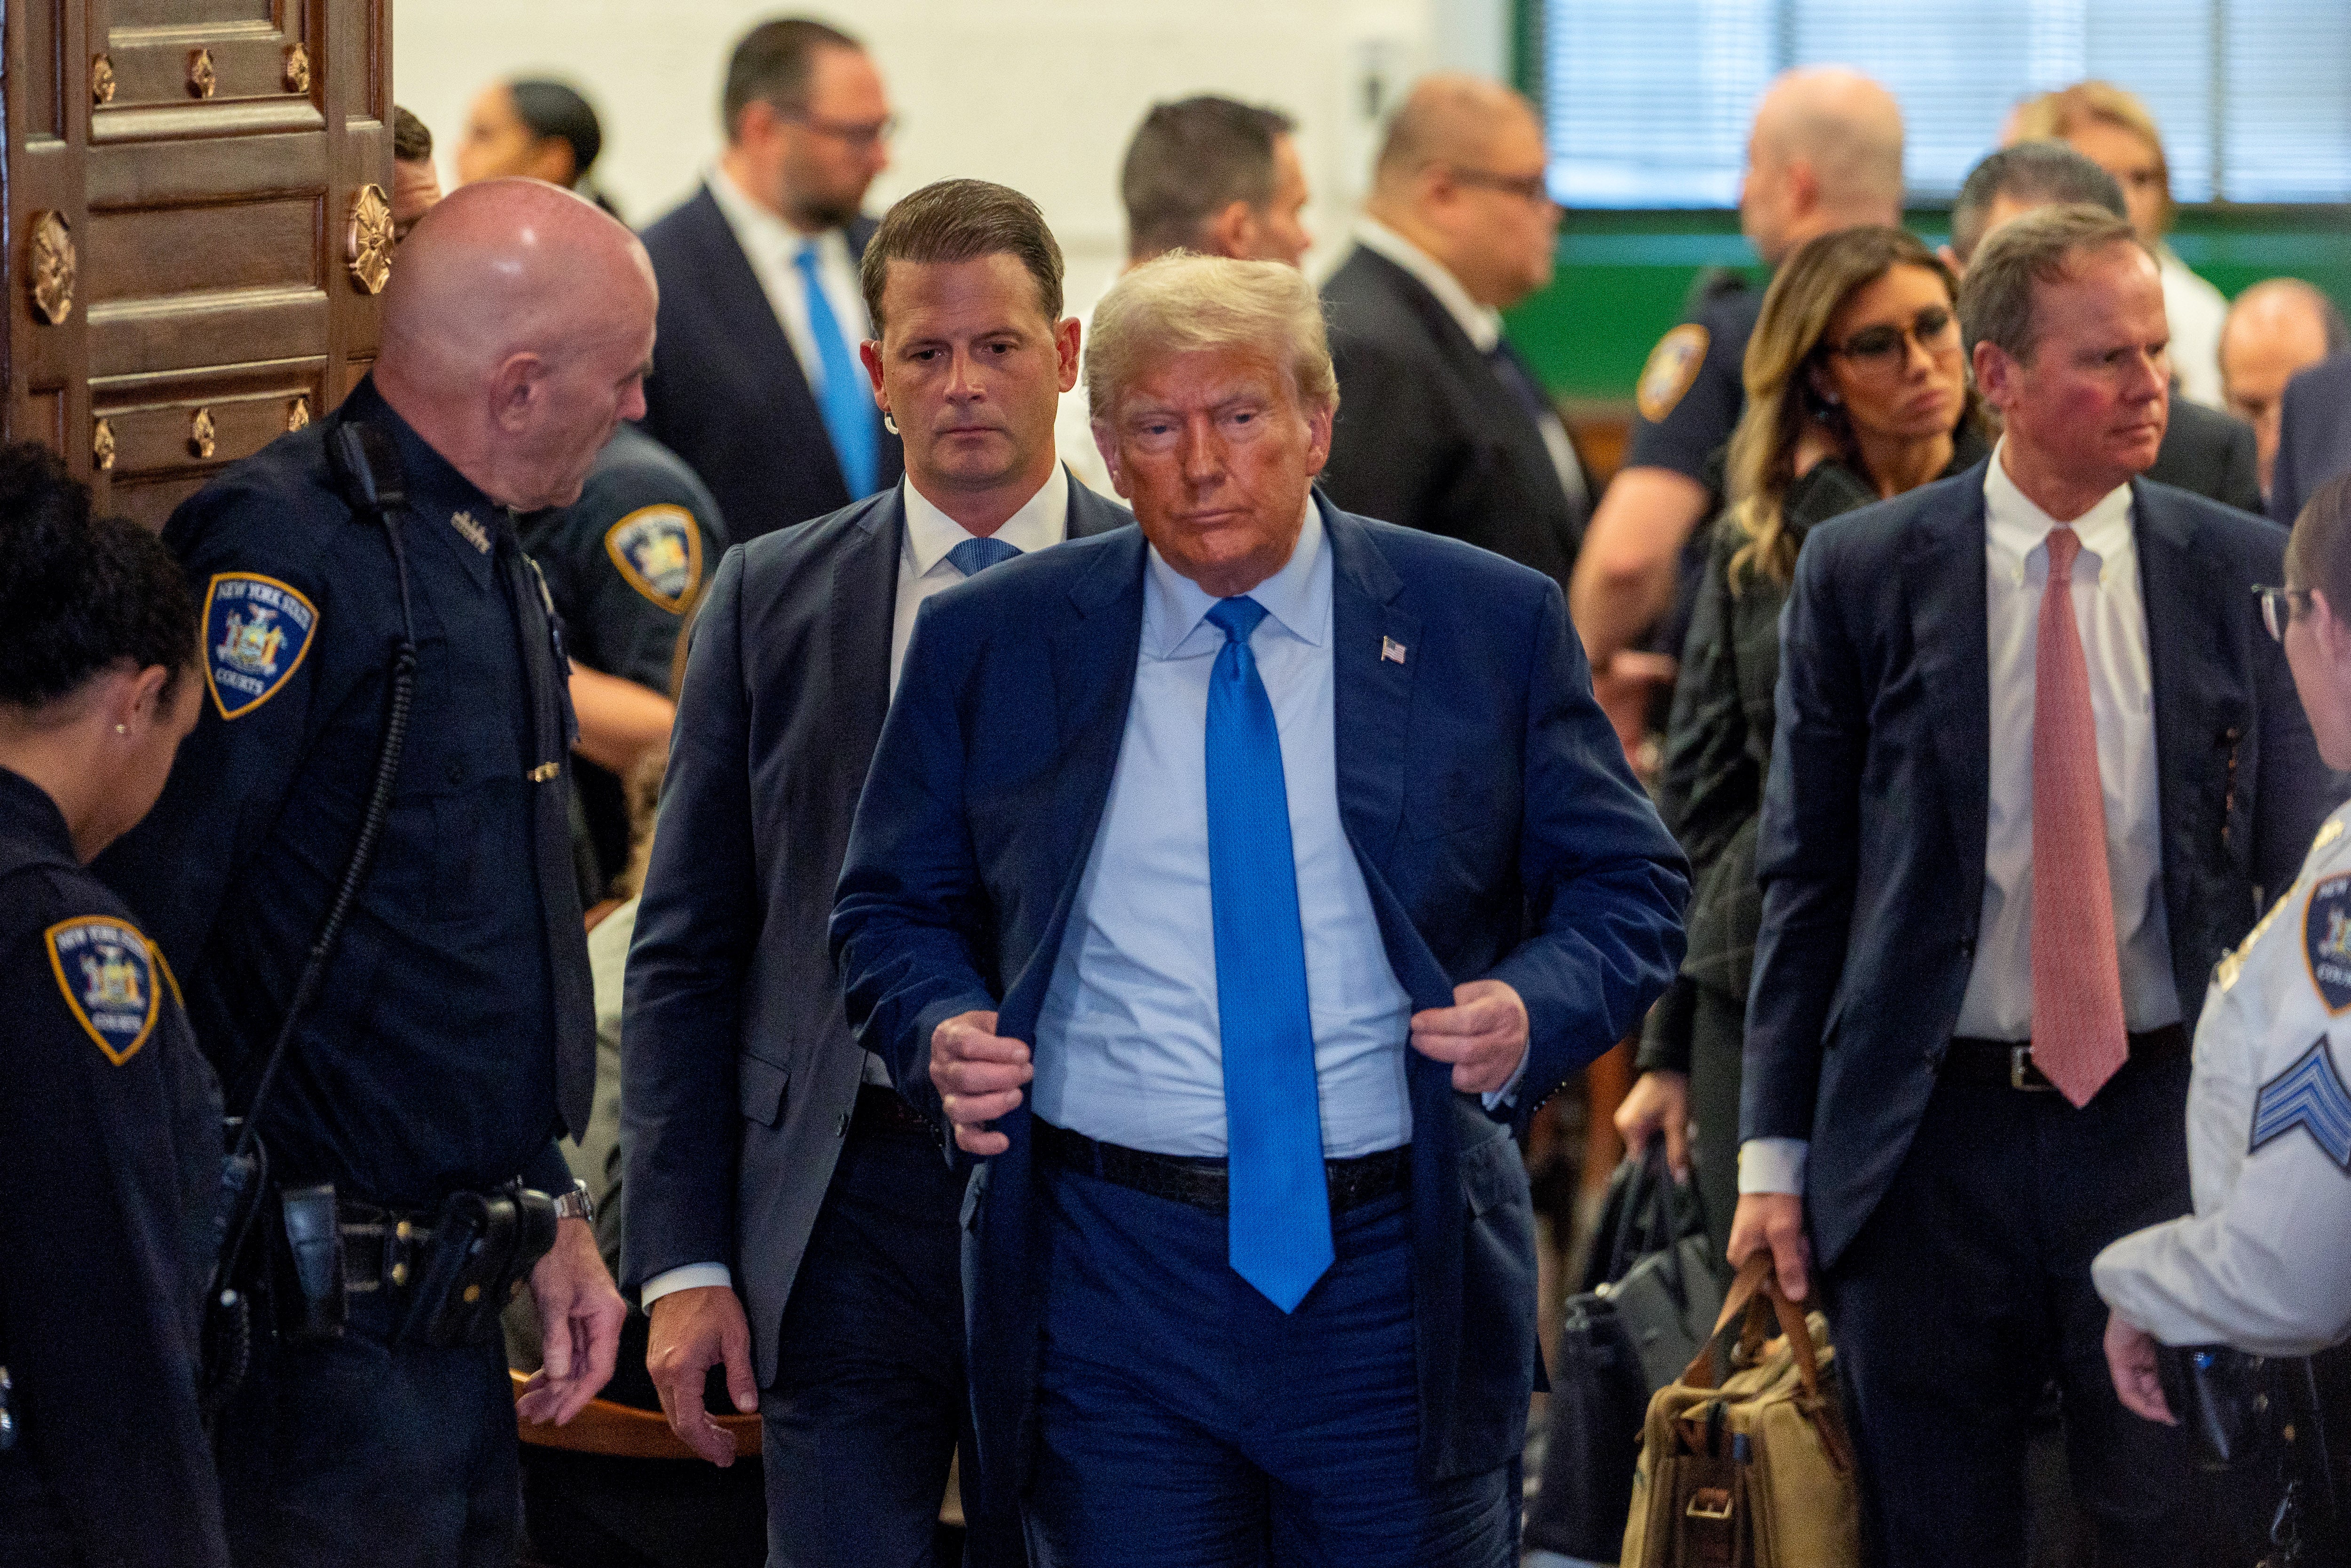 Donald Trump leaves Judge Arthur Engoron’s courtroom on 6 November after testifiting in a civil fraud trial targeting his real estate business